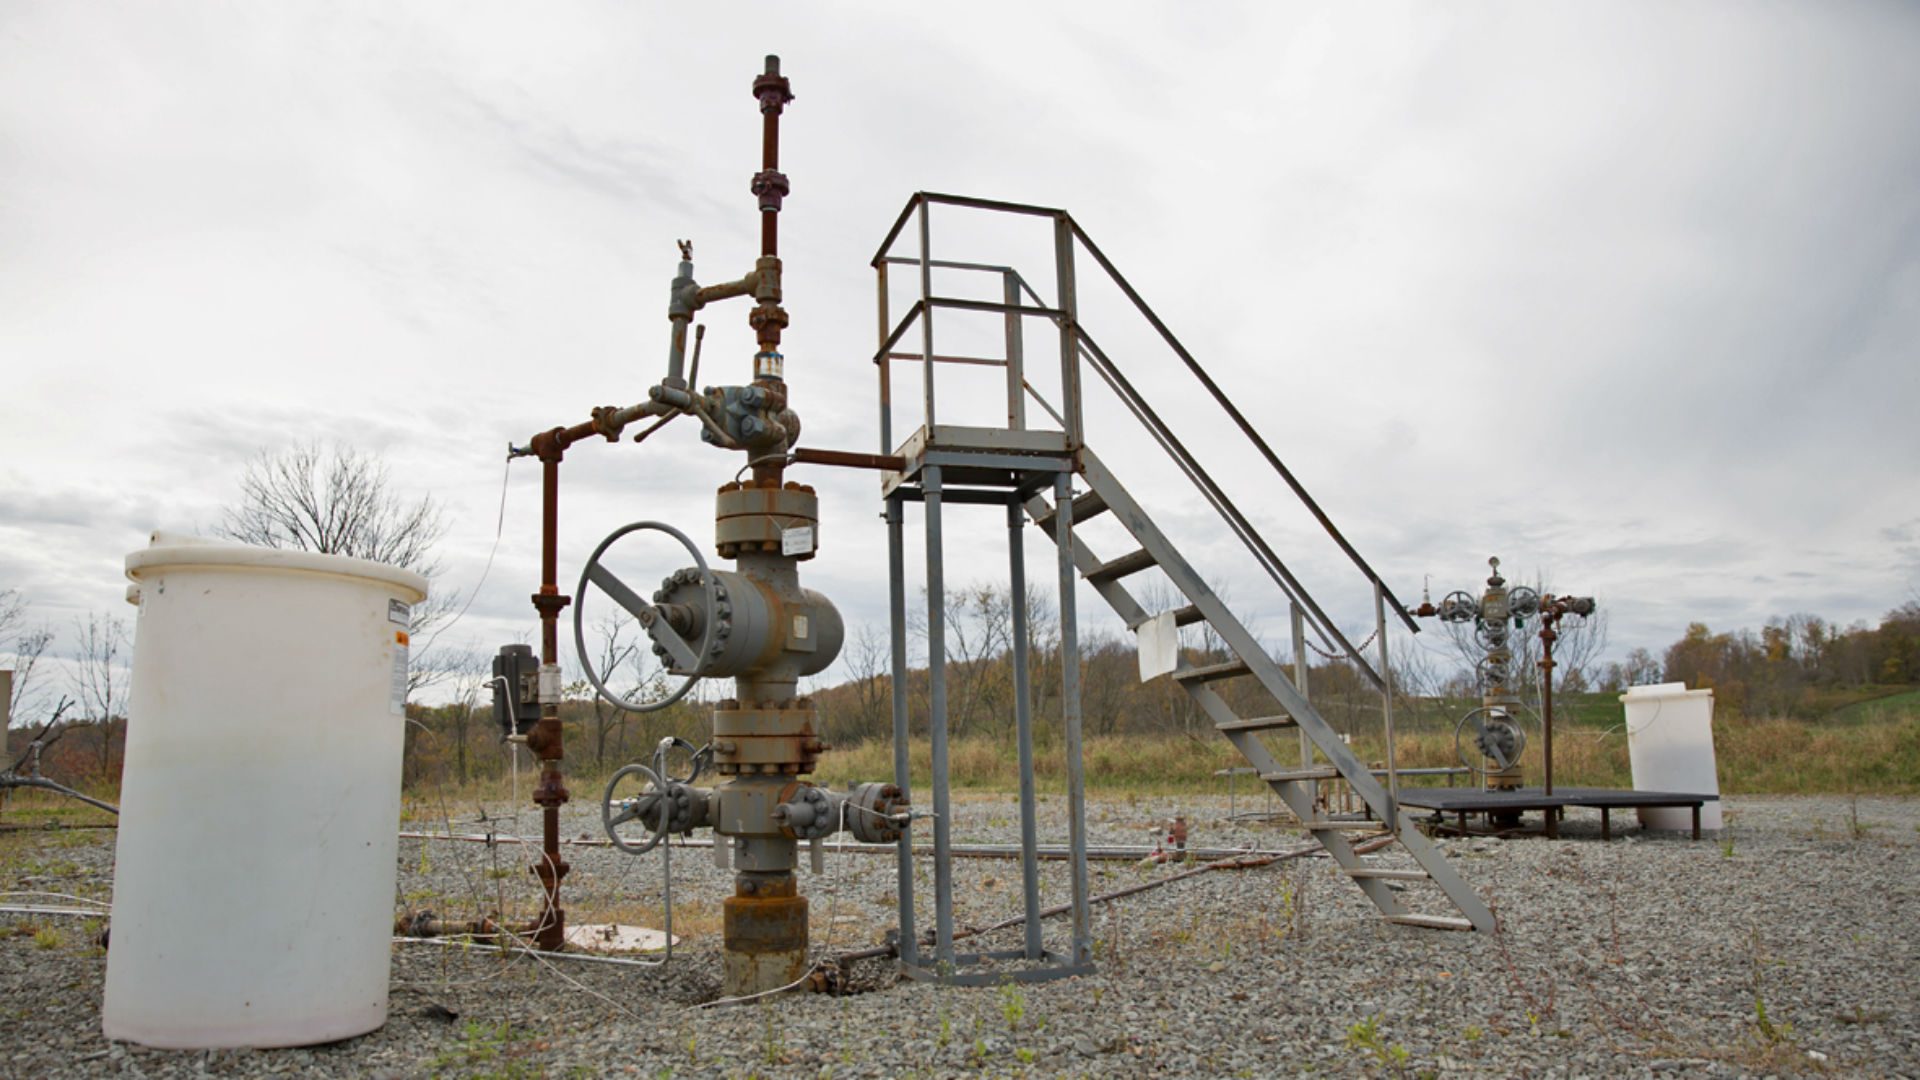 A natural gas well in Susquehanna County.